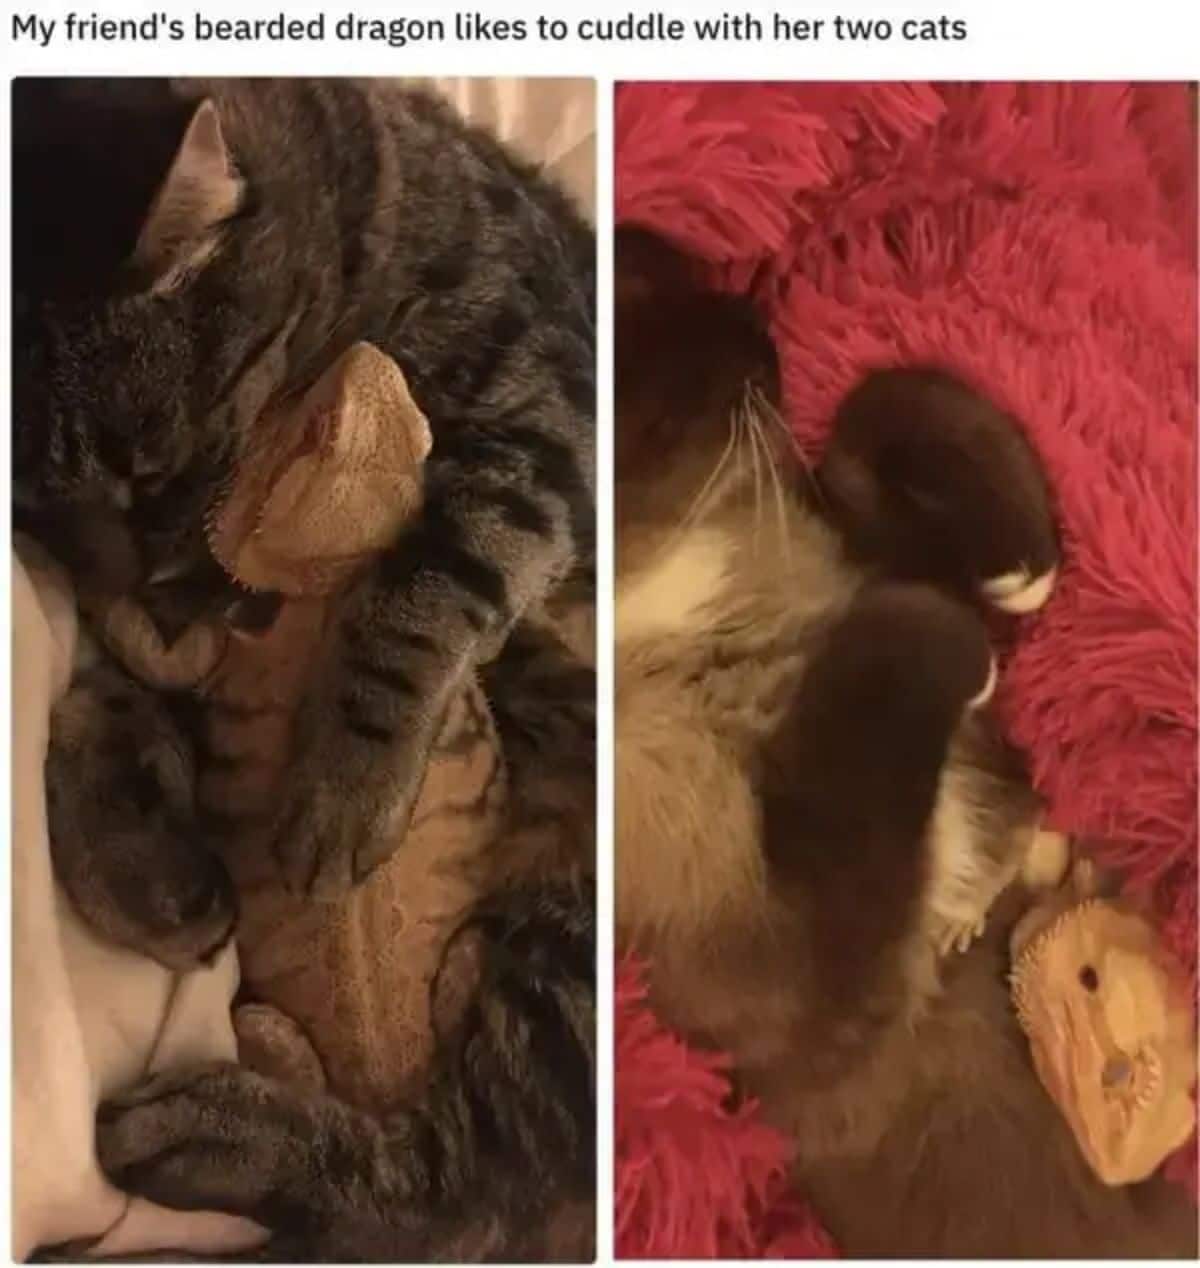 2 photos of a brown bearded dragon cuddling with a grey tabby cat and a brown fluffy cat in another